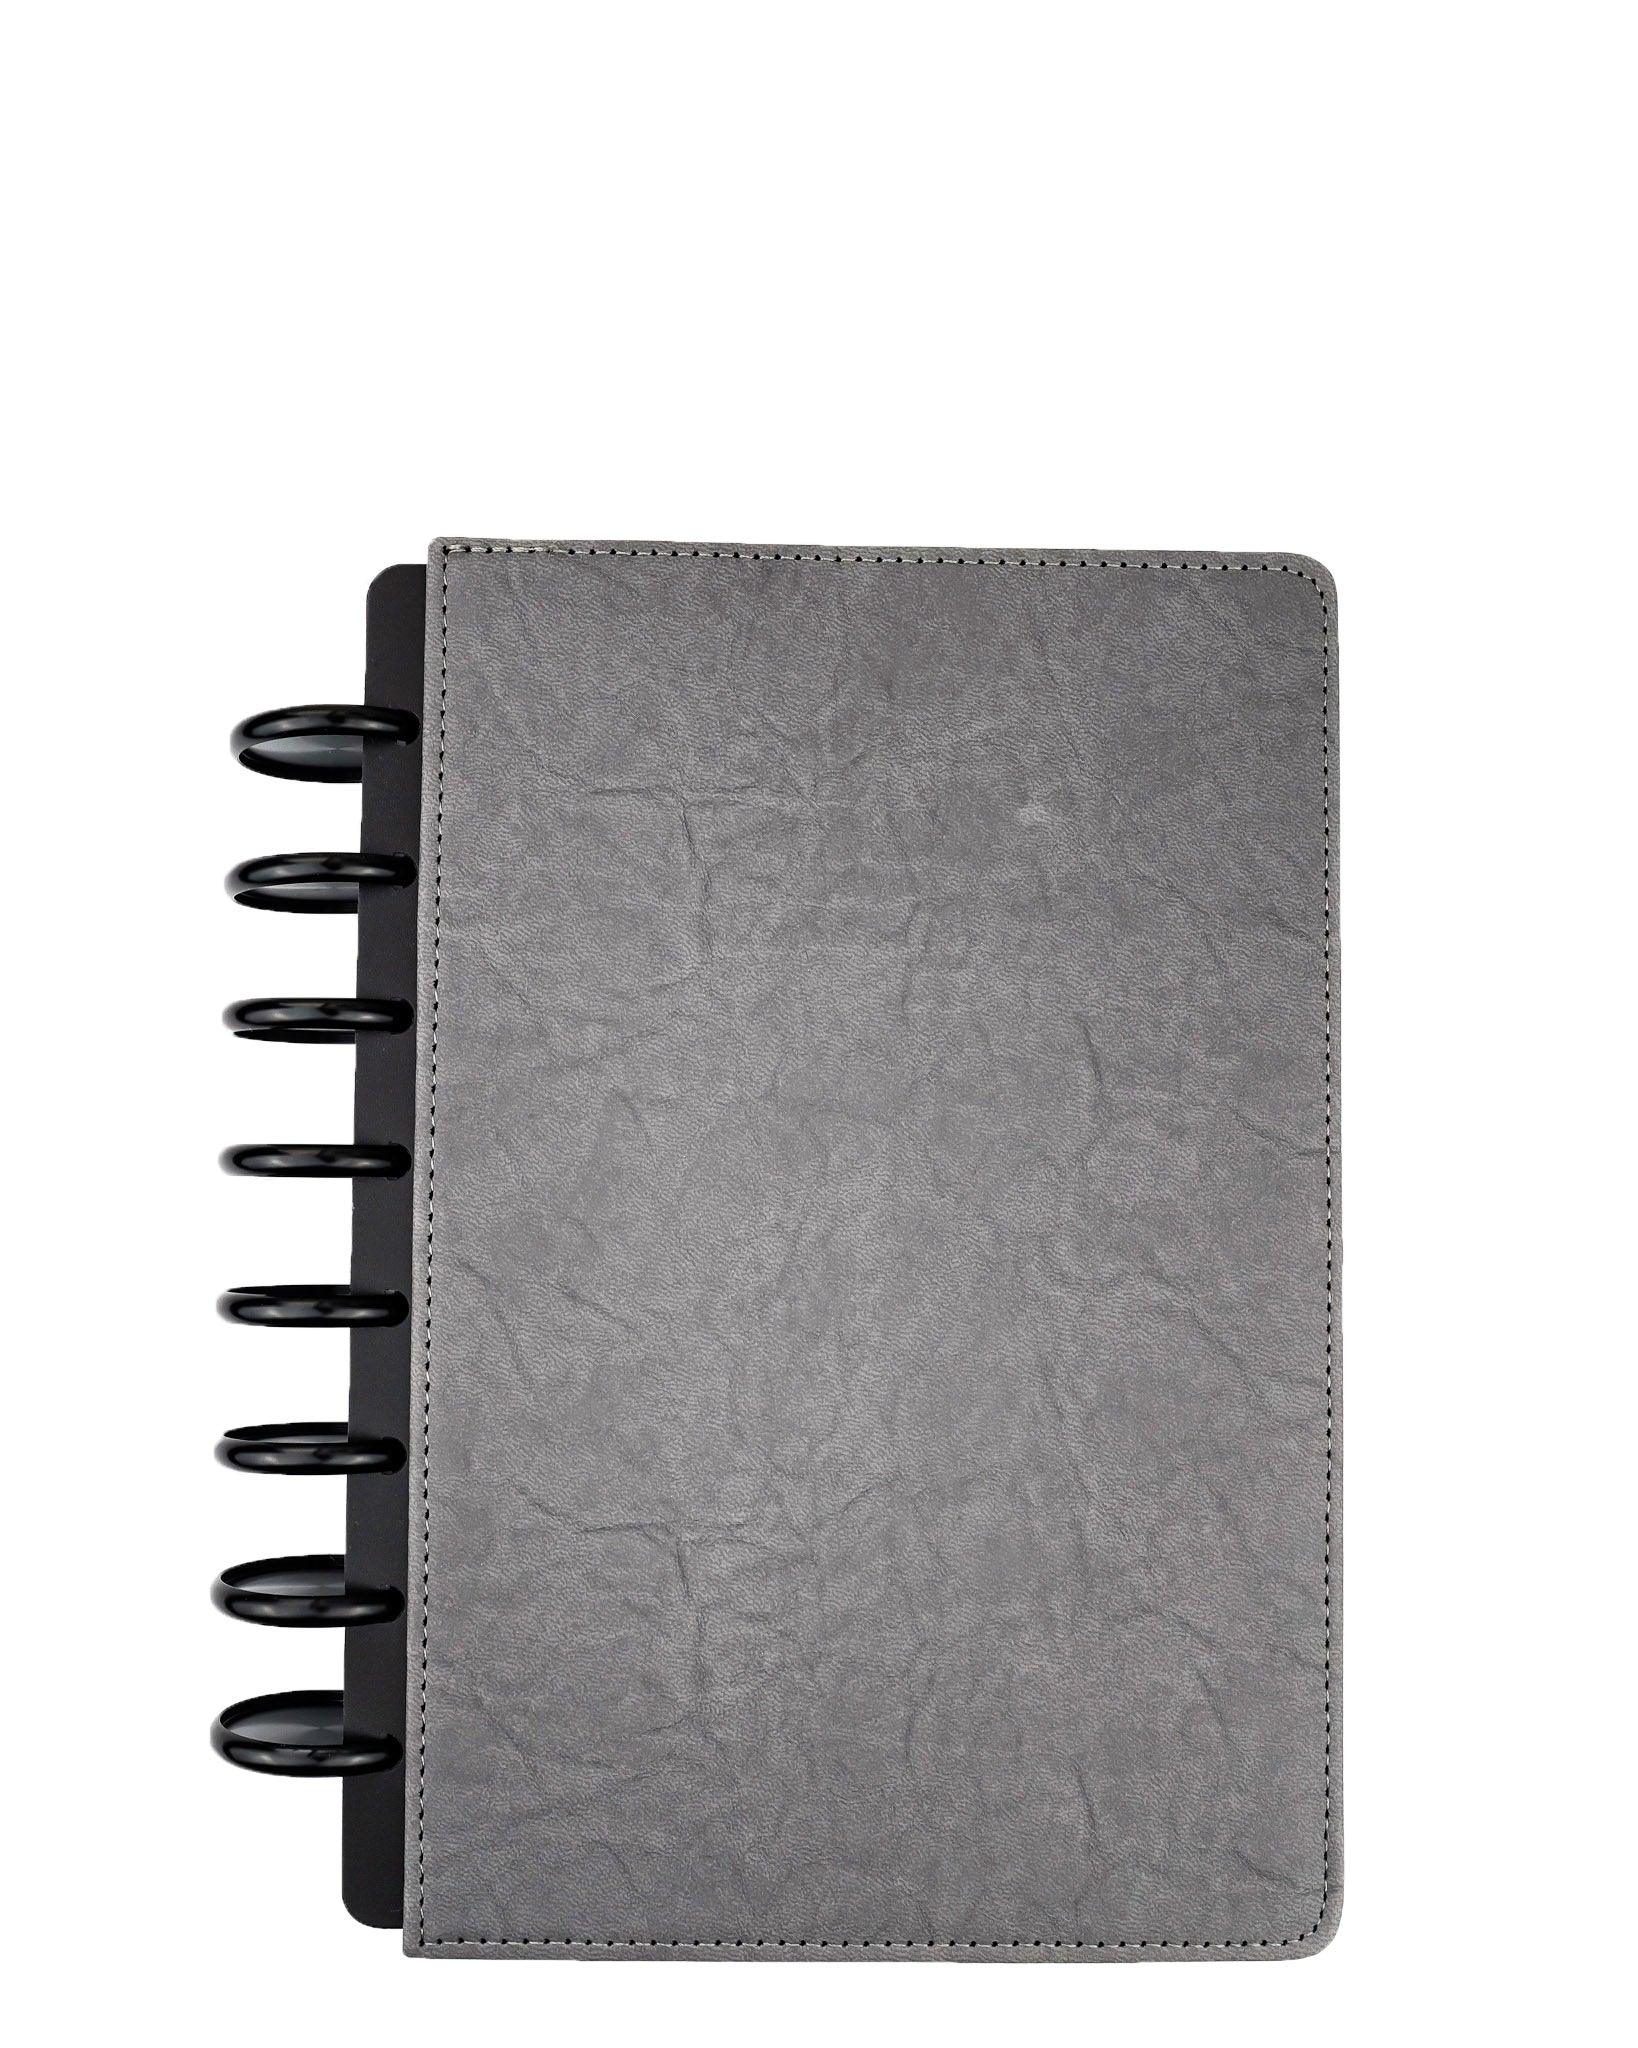 JOY- Zippered Mini Planner Cover for Coil Bound / Discbound Planners